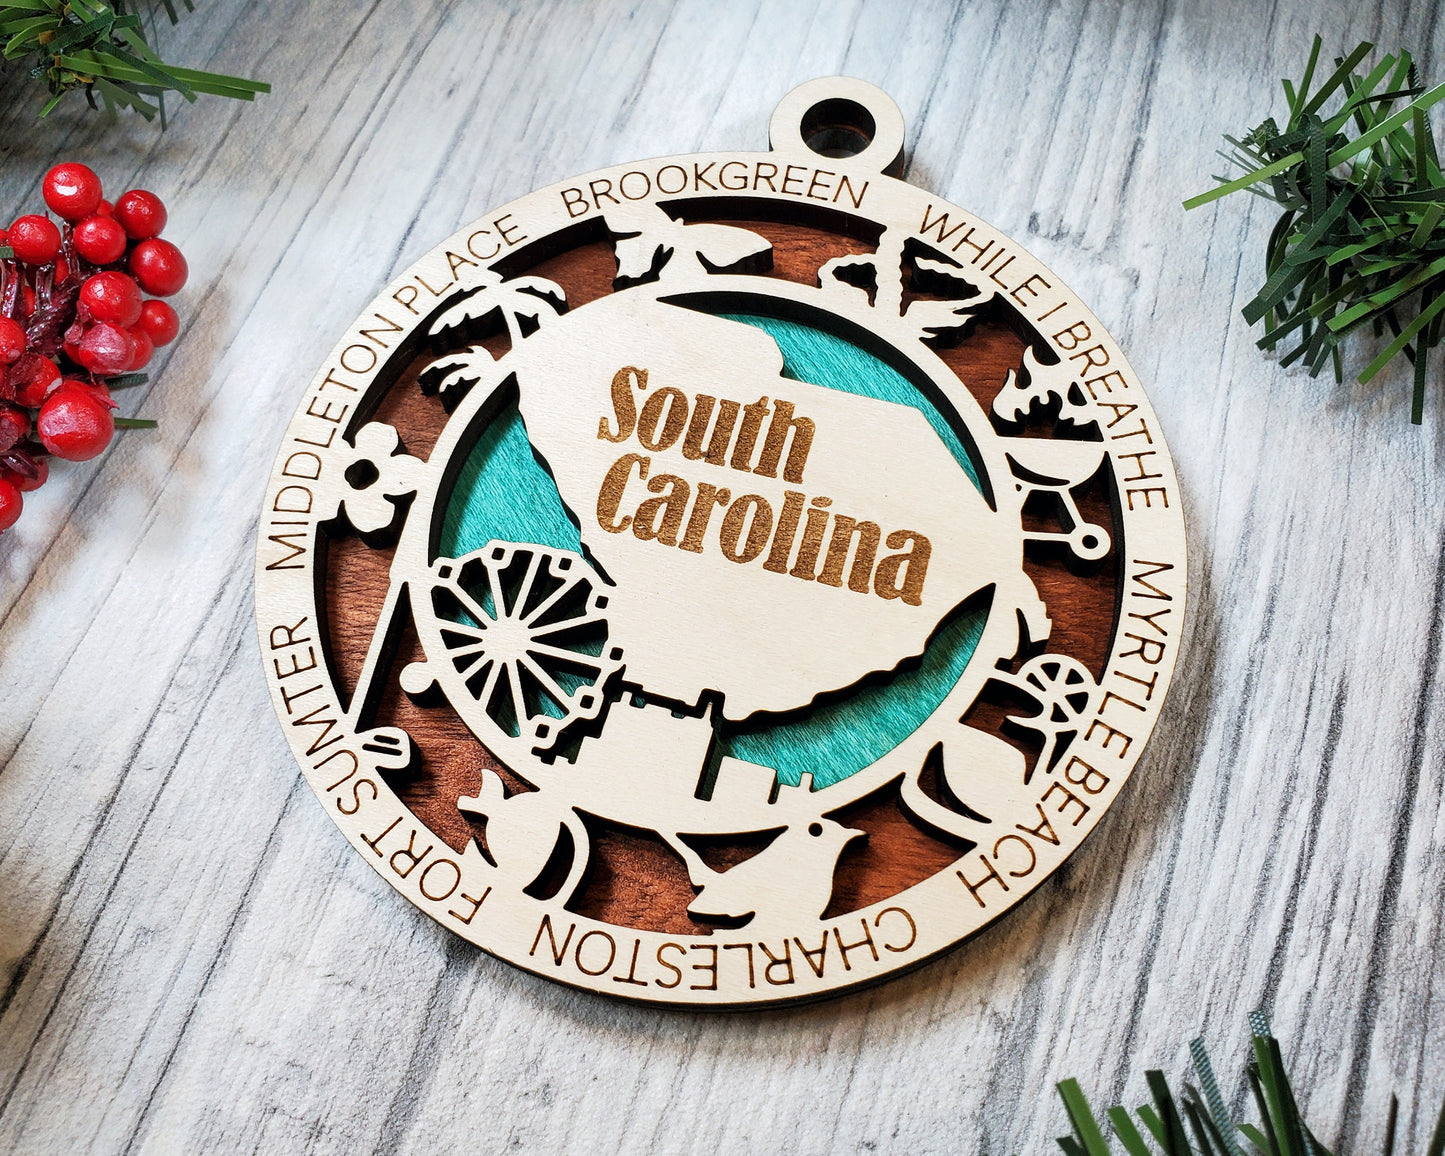 South Carolina State Ornament - SVG File Download - Sized for Glowforge - Laser Ready Digital Files